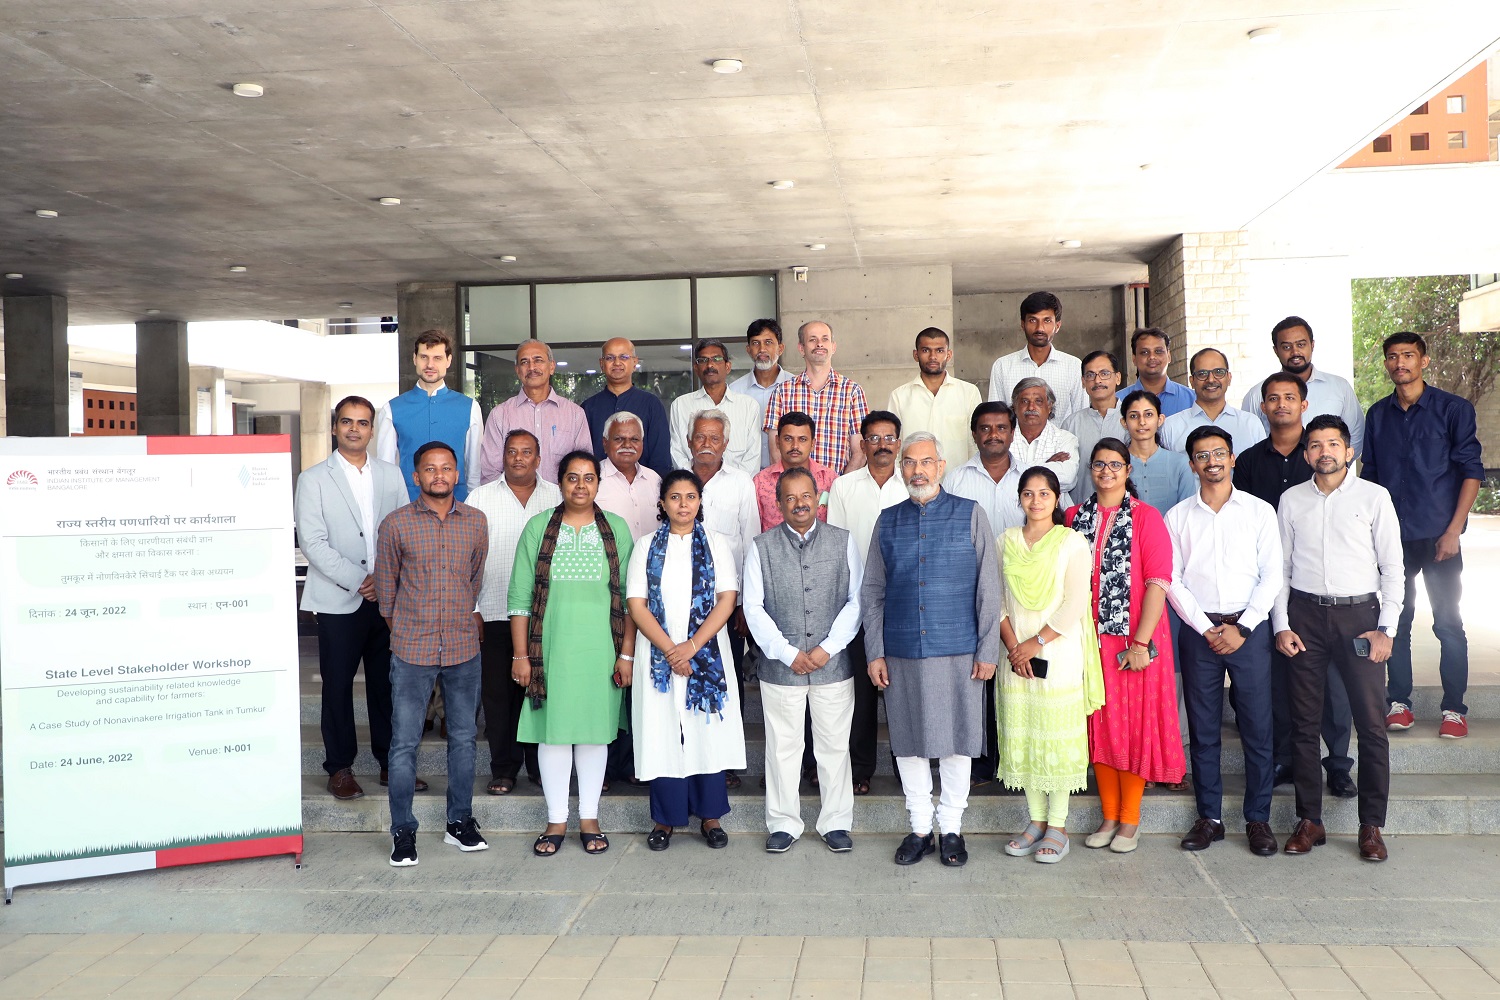 A snapshot the participants of the workshop from academic institutes, government officials, non-governmental organizations, funding agencies and farmers.